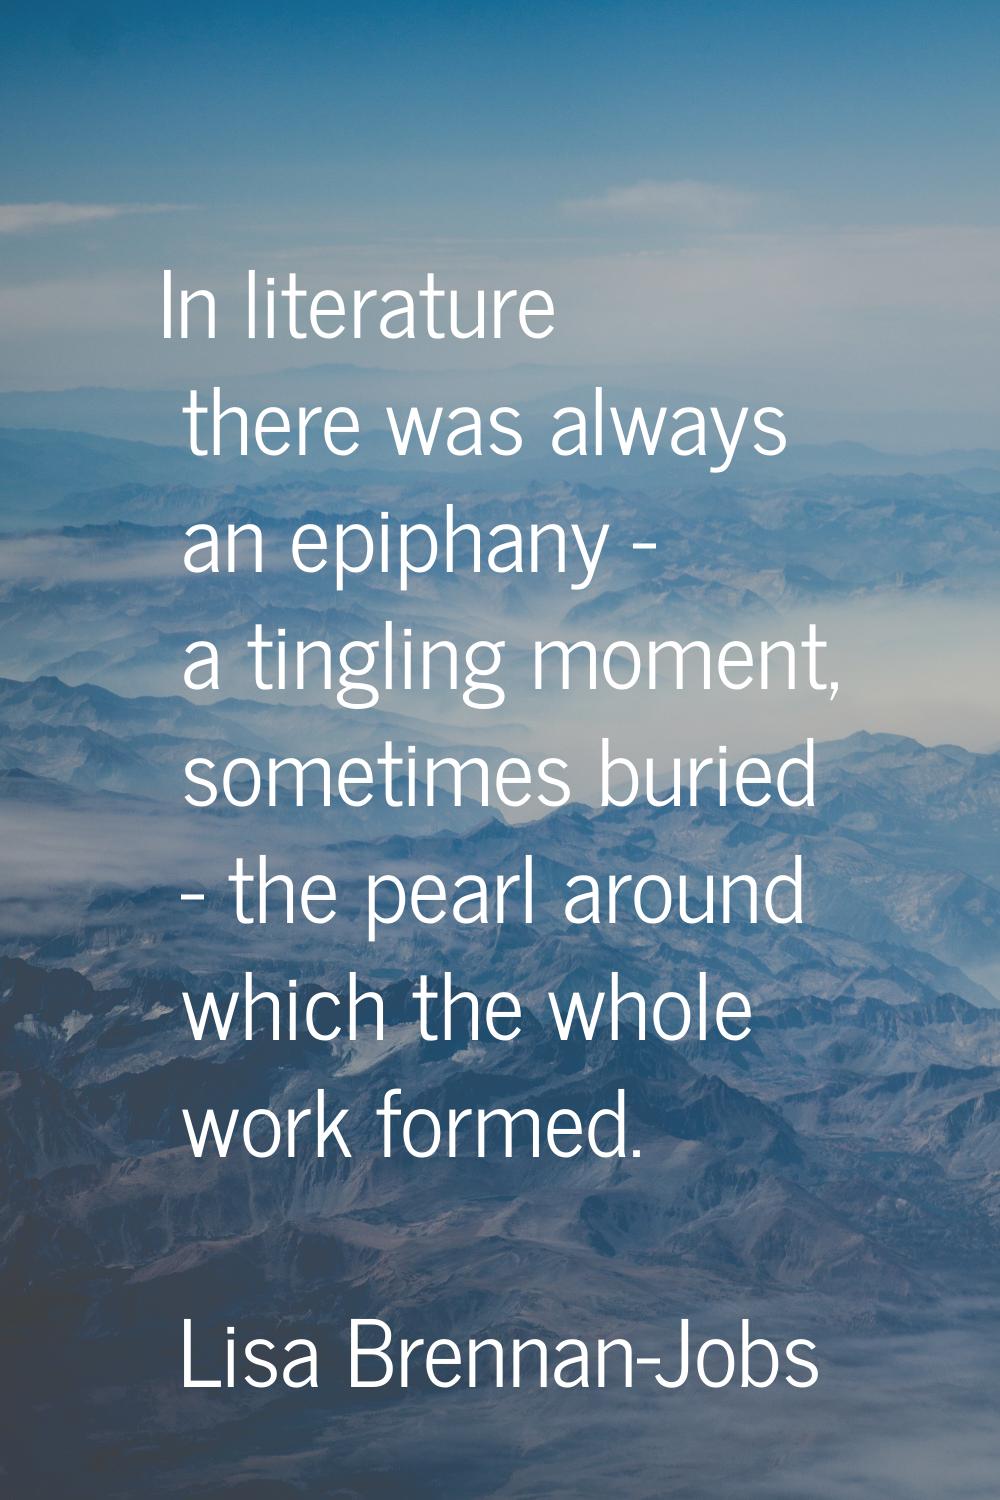 In literature there was always an epiphany - a tingling moment, sometimes buried - the pearl around